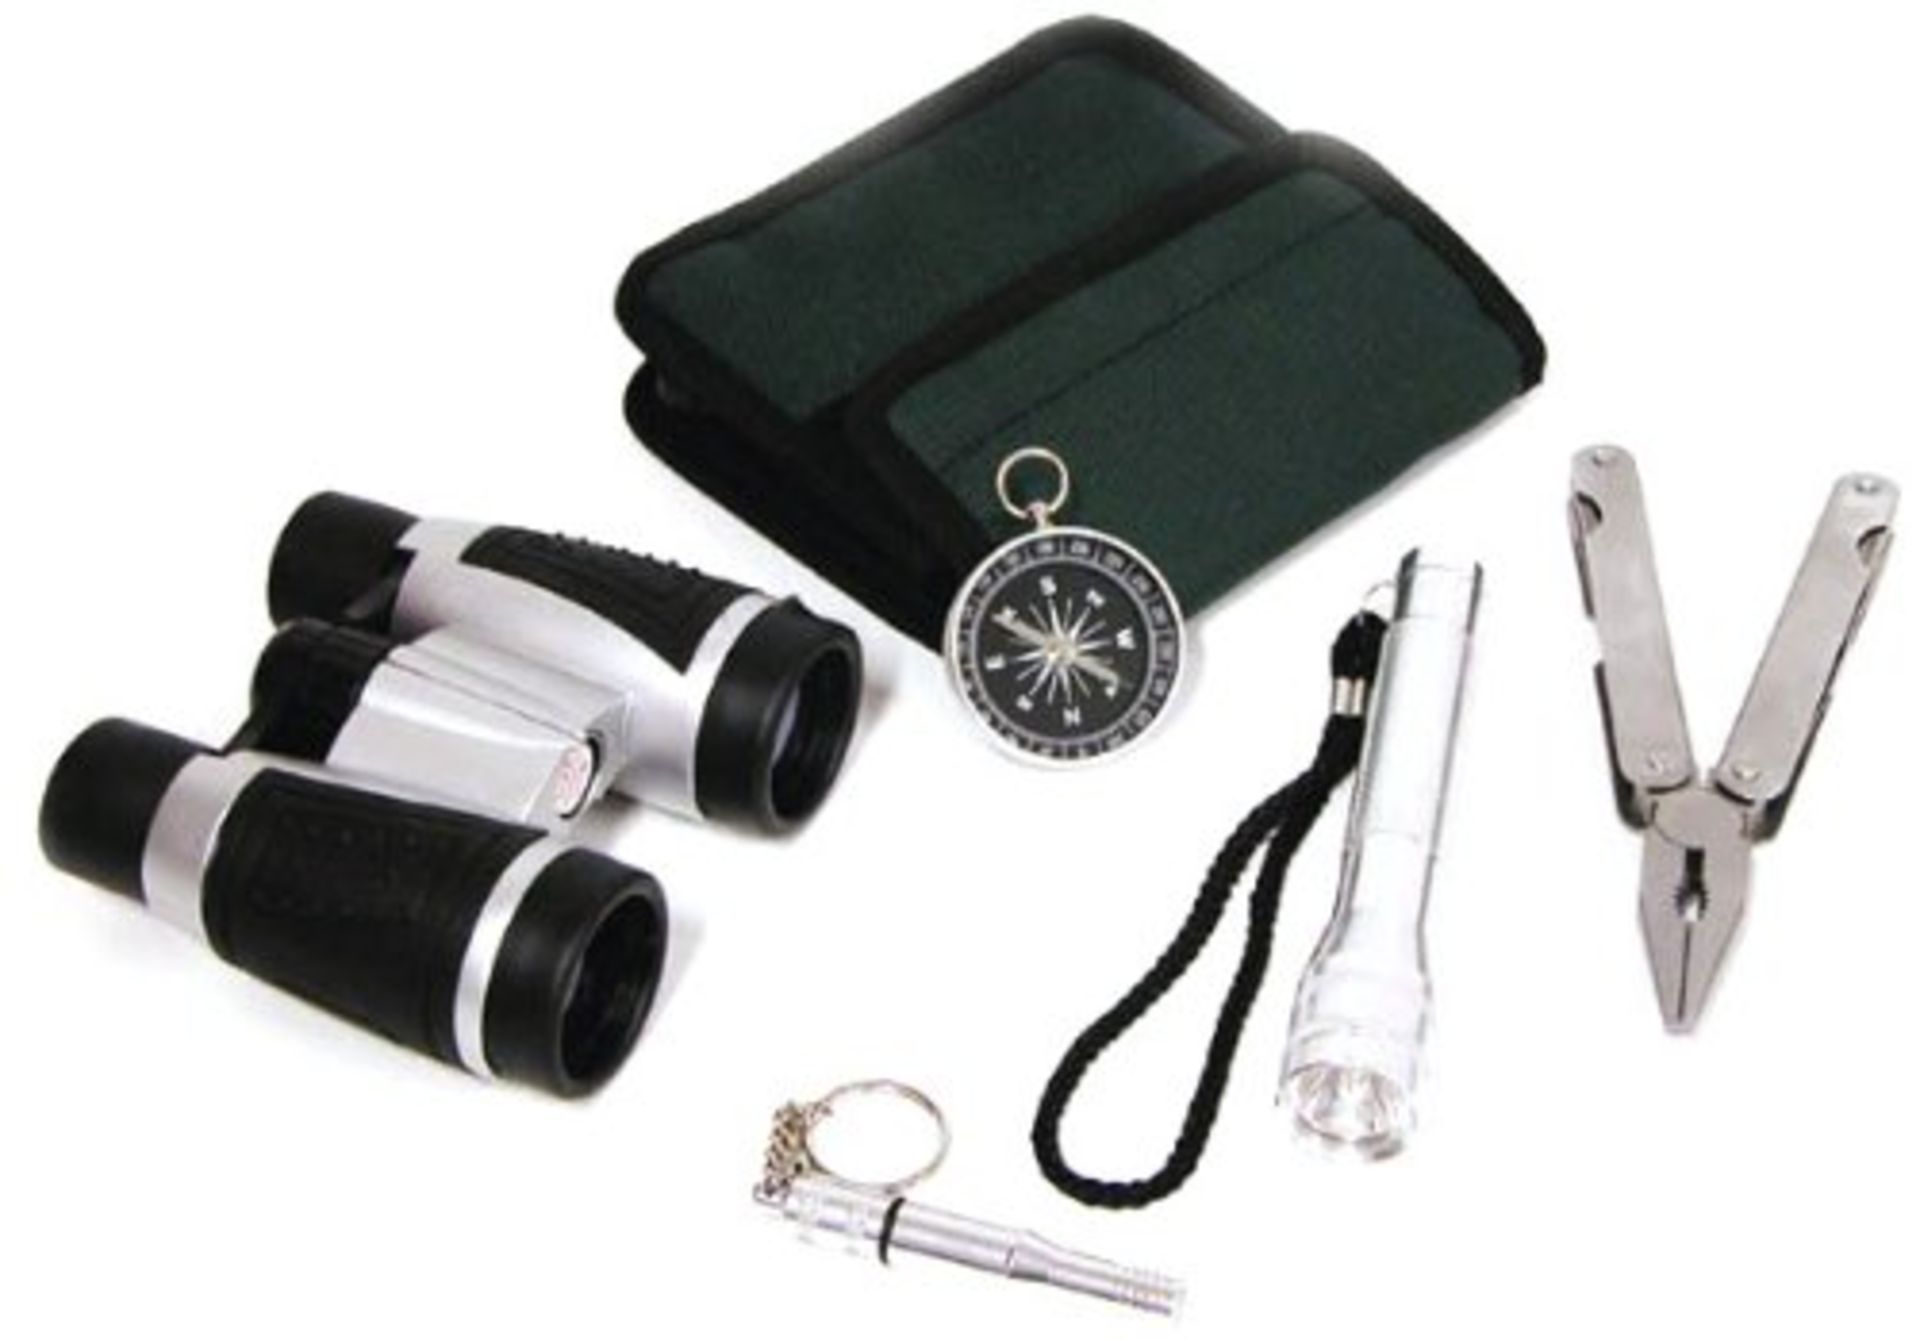 V *TRADE QTY* Brand New Explorer Kit - Useful For Camping/Hiking/Bike Rides Etc Includes Multi-